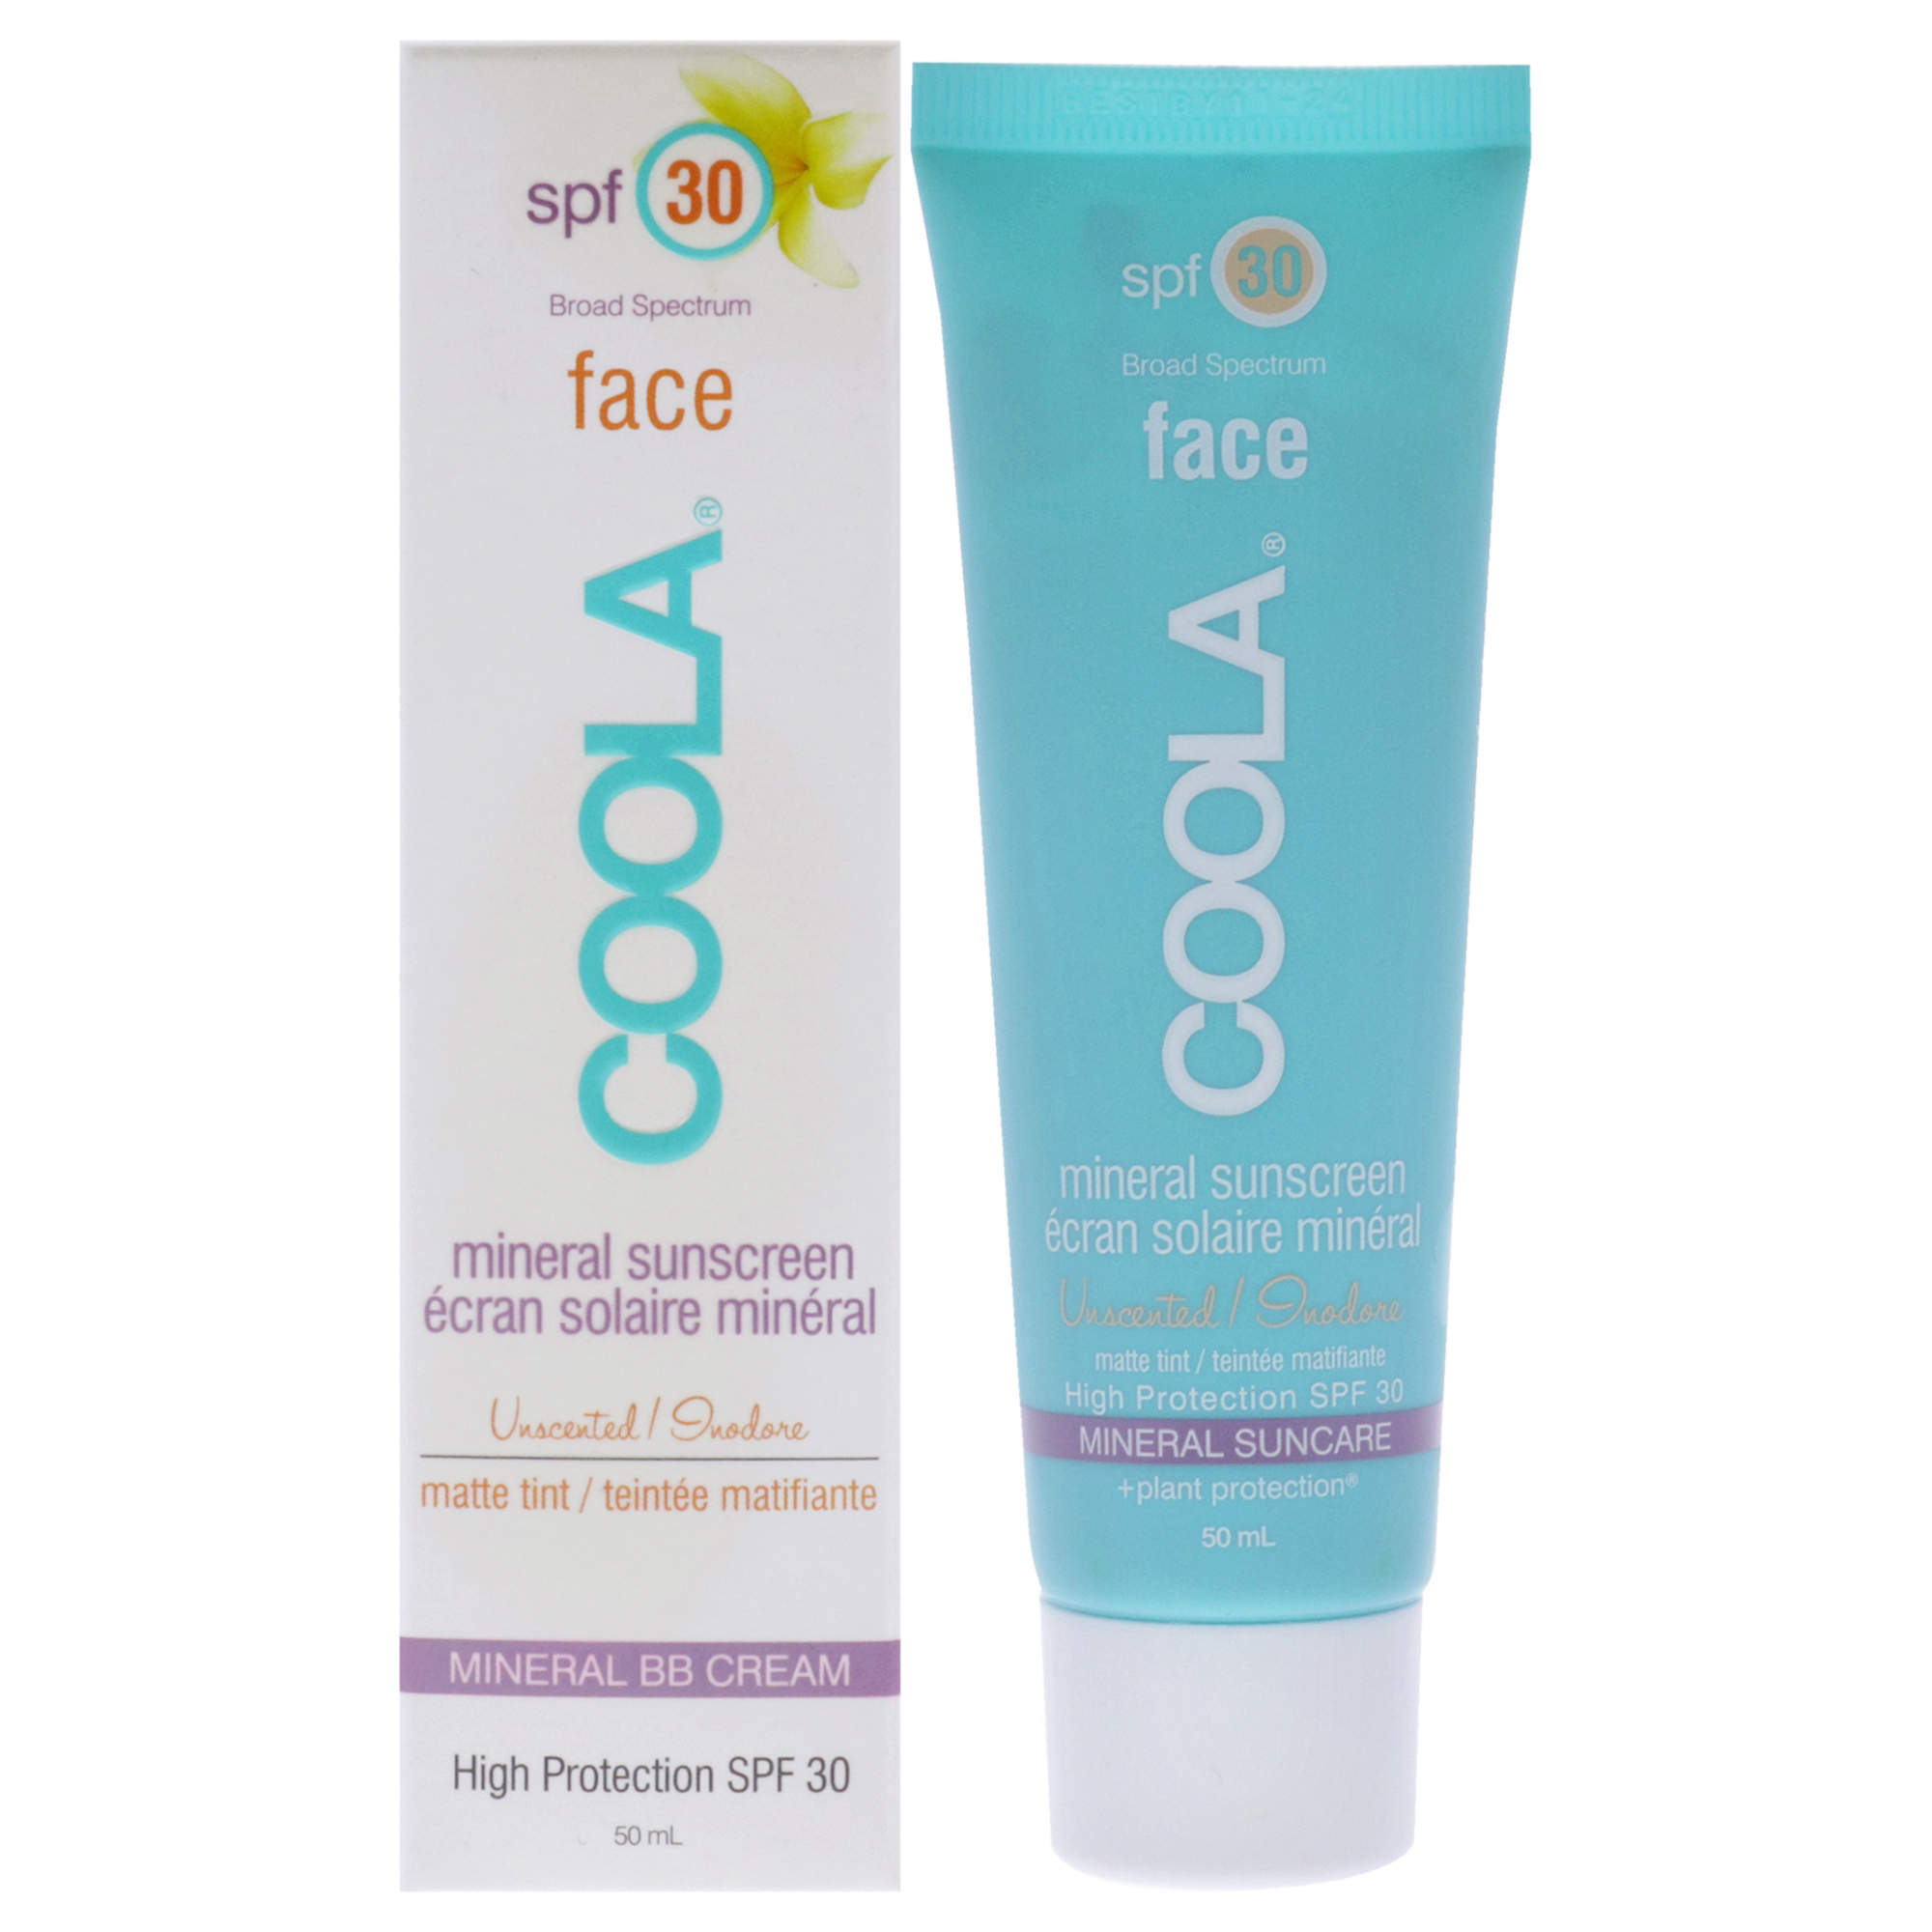 Coola Mineral Face Sunscreen Matte Tint SPF 30 - Unscented - 1.7 oz - image 1 of 2